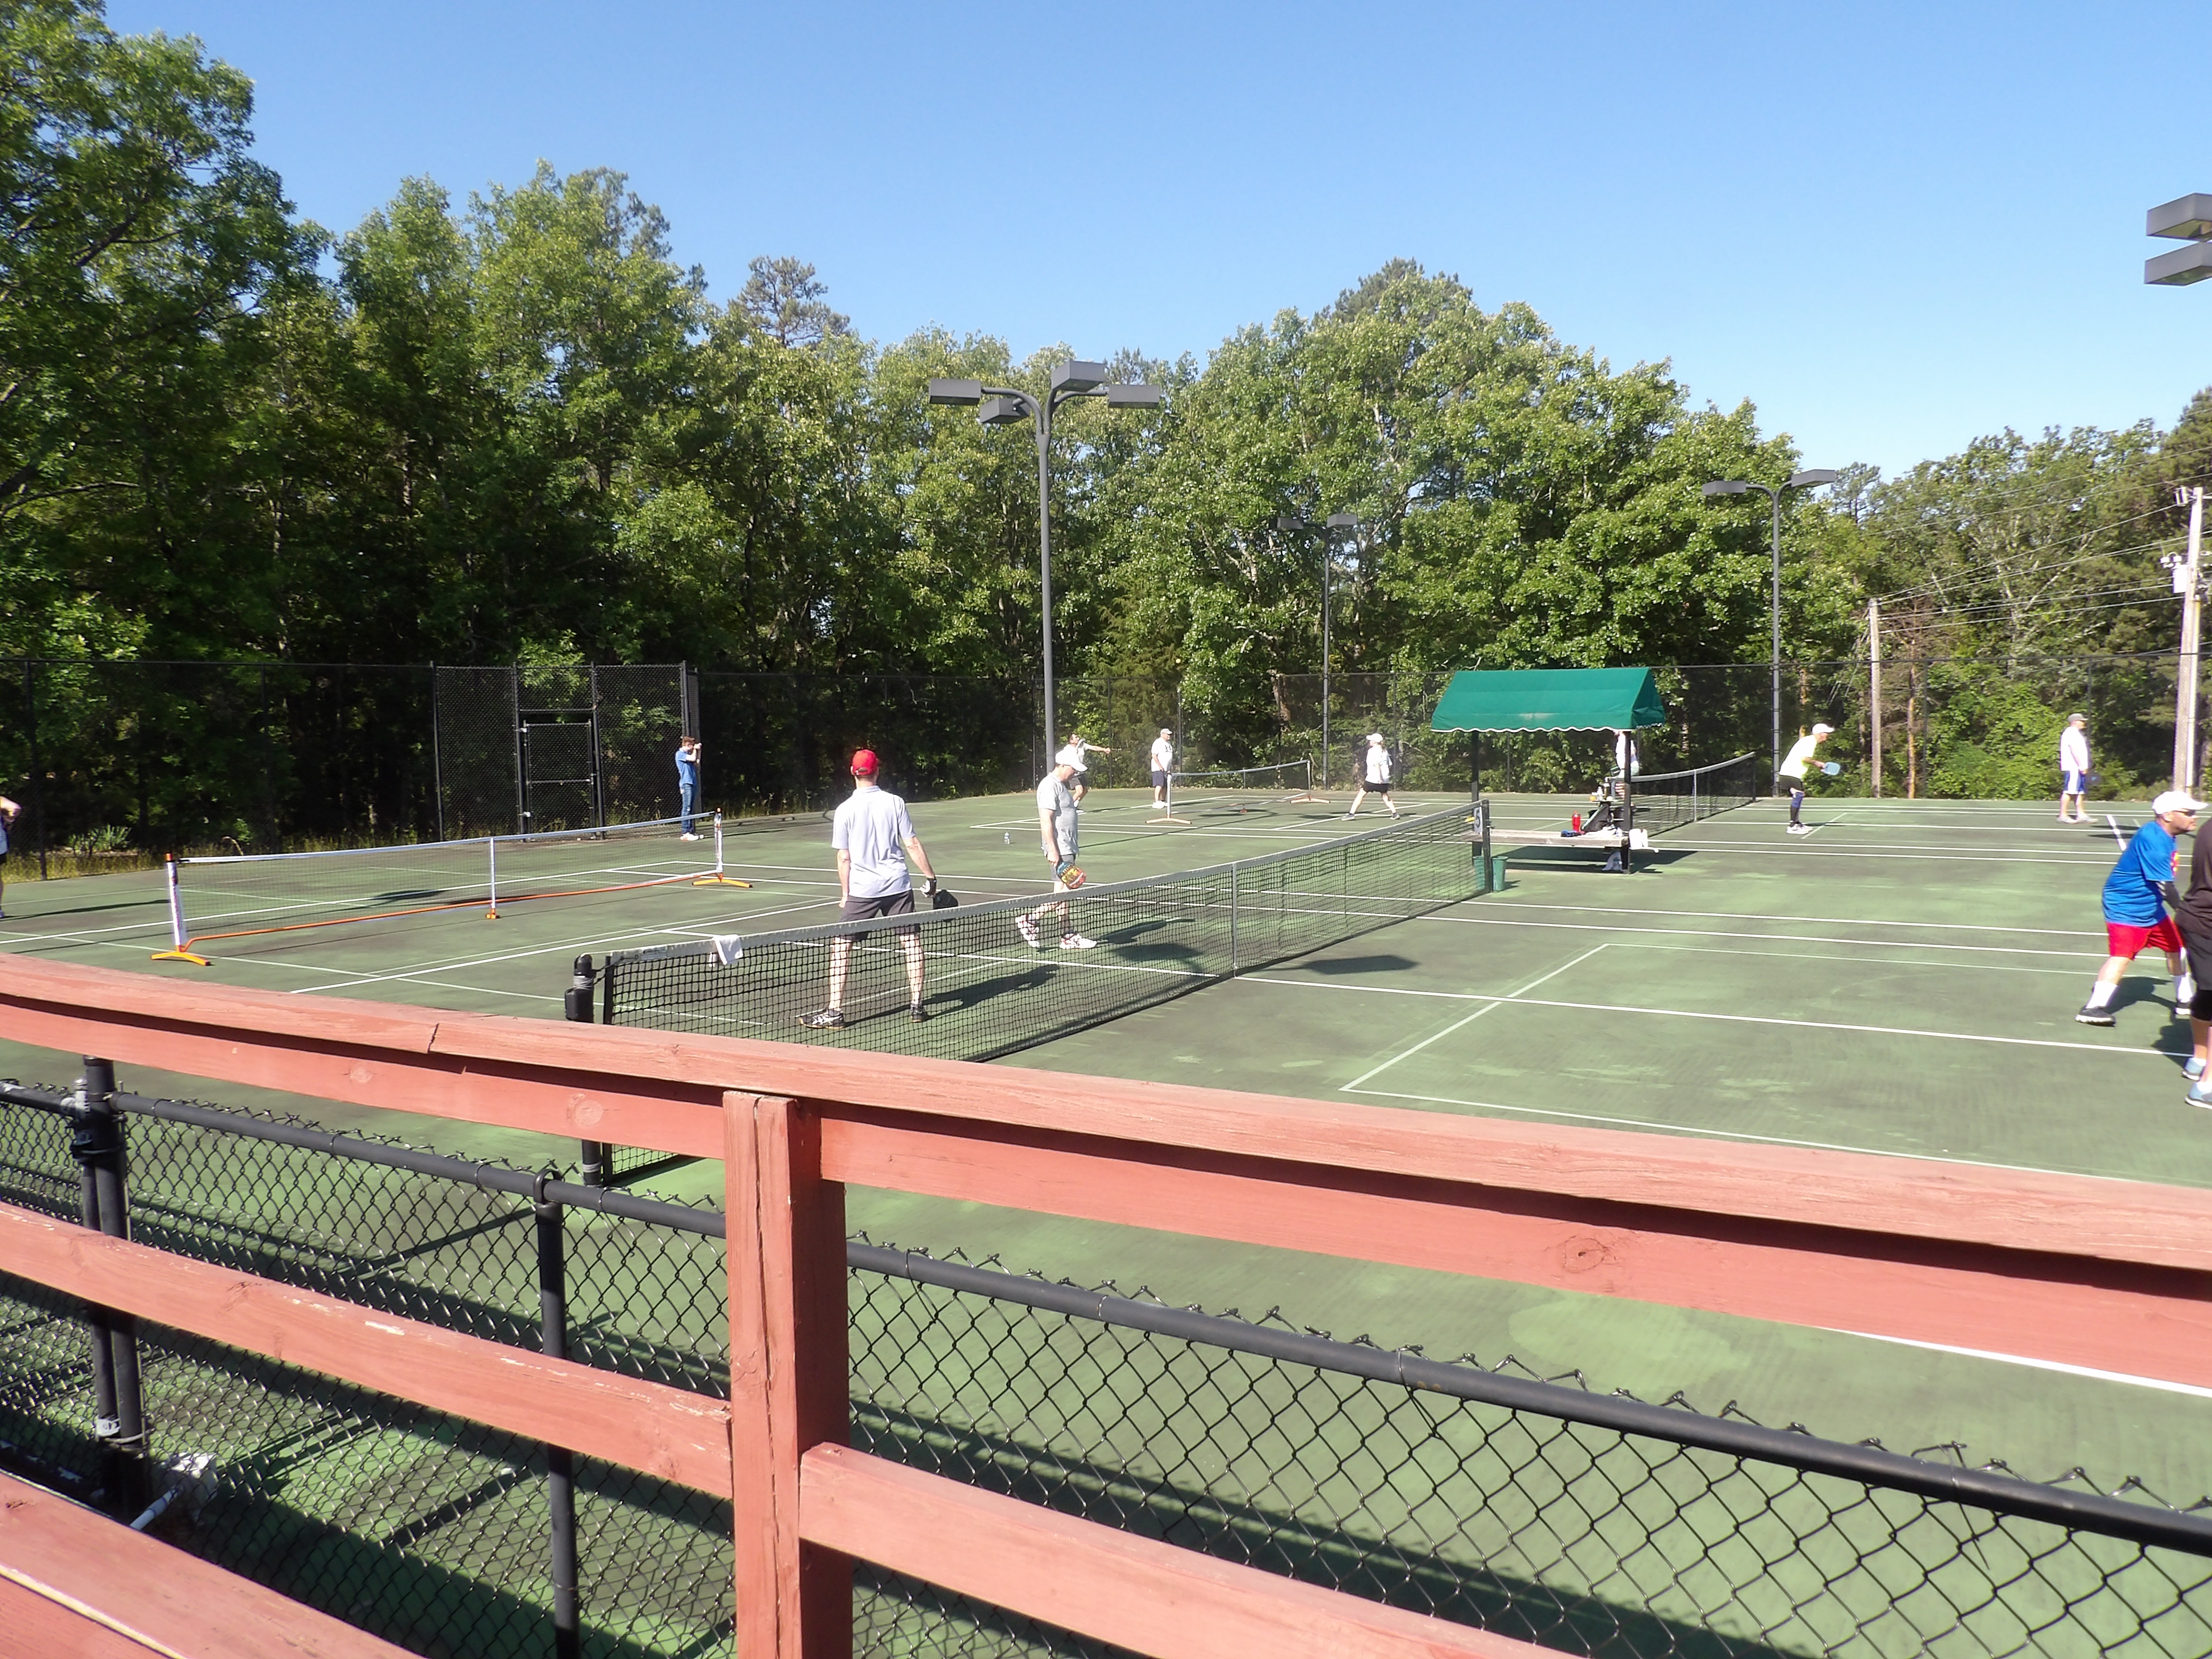 People playing Pickleball on the Pickleball courts in Fairfield Bay, AR.